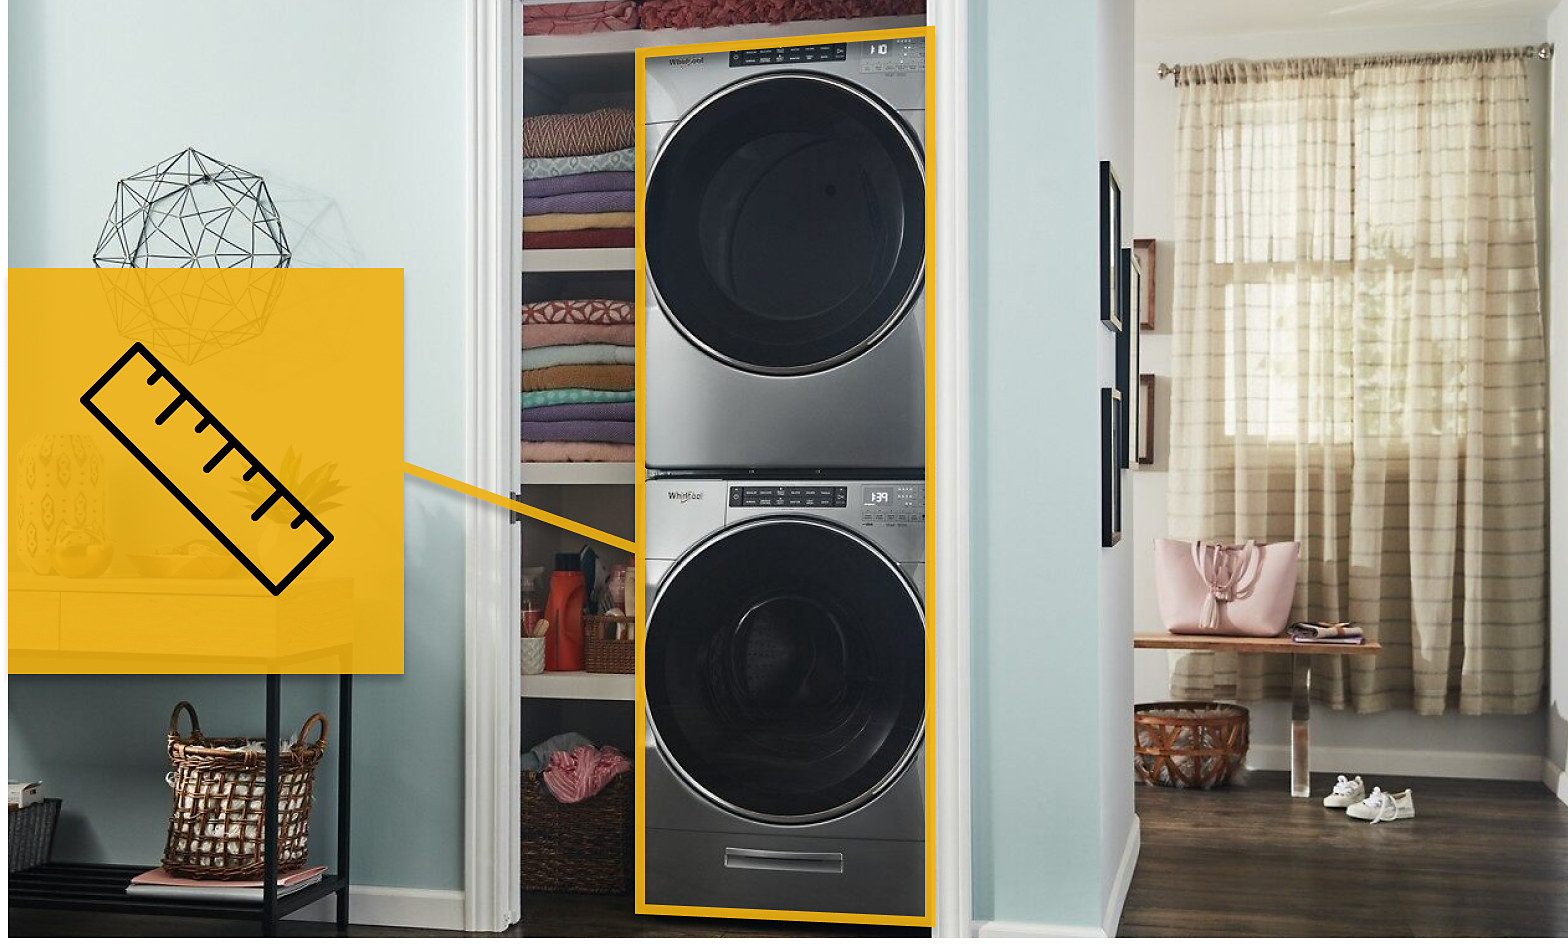 Stacked washer and dryer with ruler icon